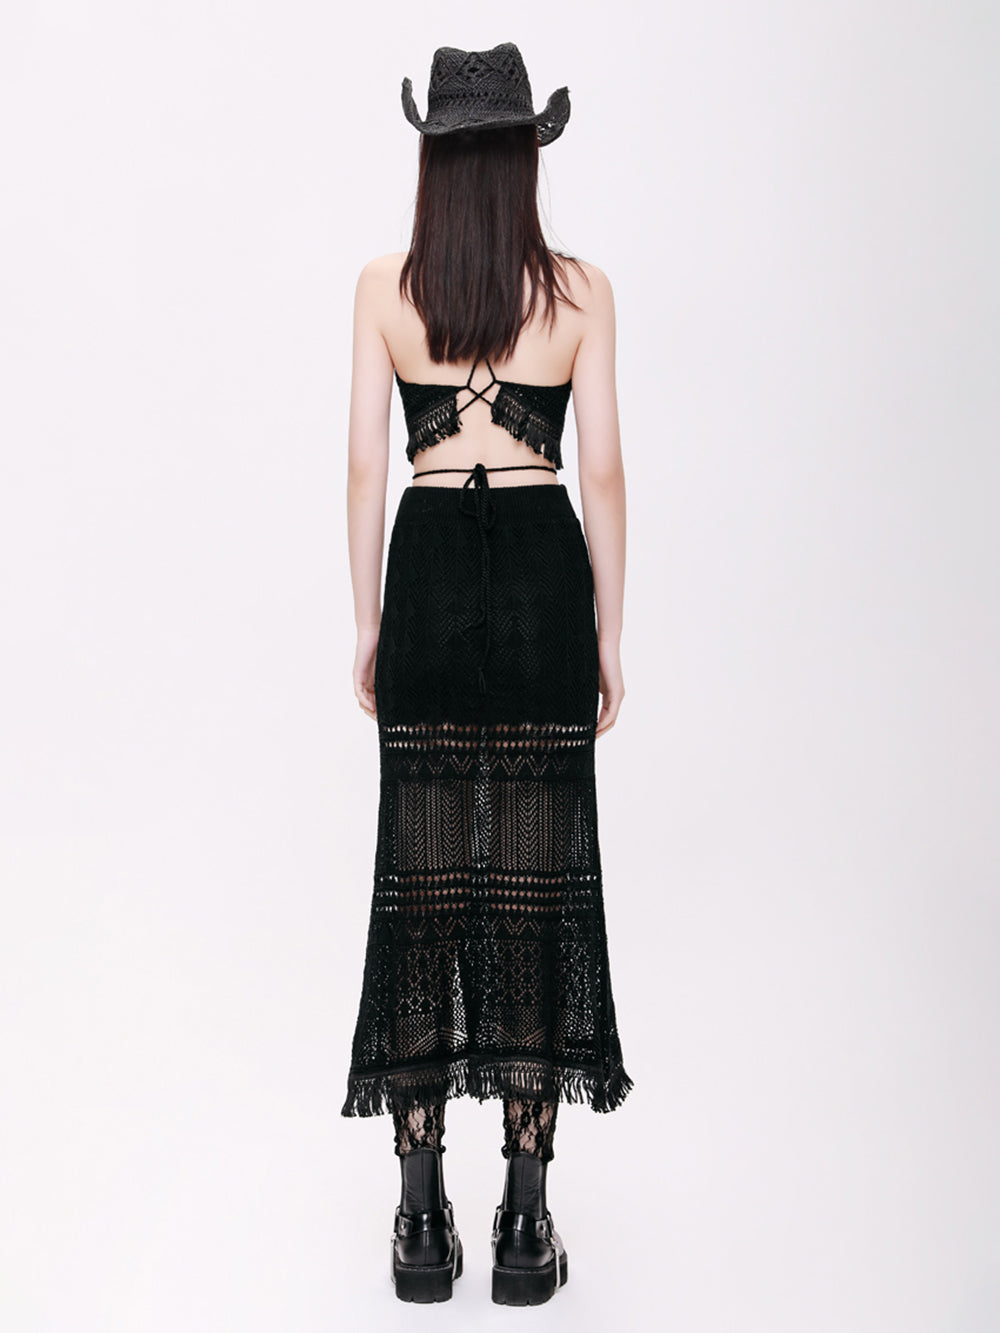 MUKTANK×CUUDICLAB Hollwed-out Knit Tassel Skirts